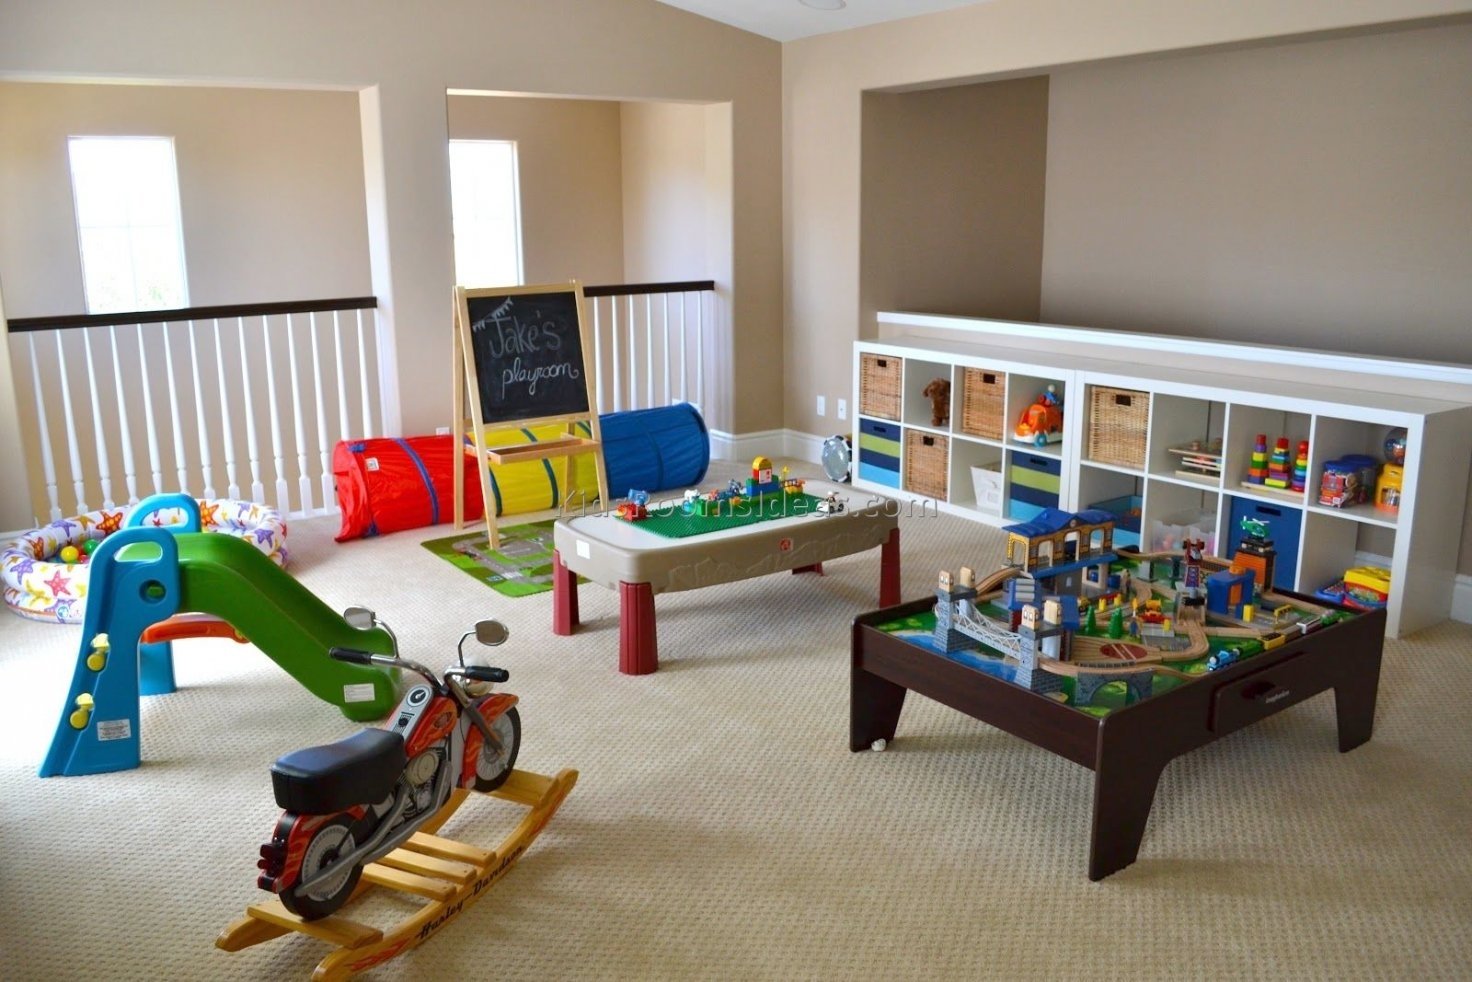 10 Gorgeous Game Room Ideas For Kids boys game room ideas kids game room ideas game rooms for kids and 2022